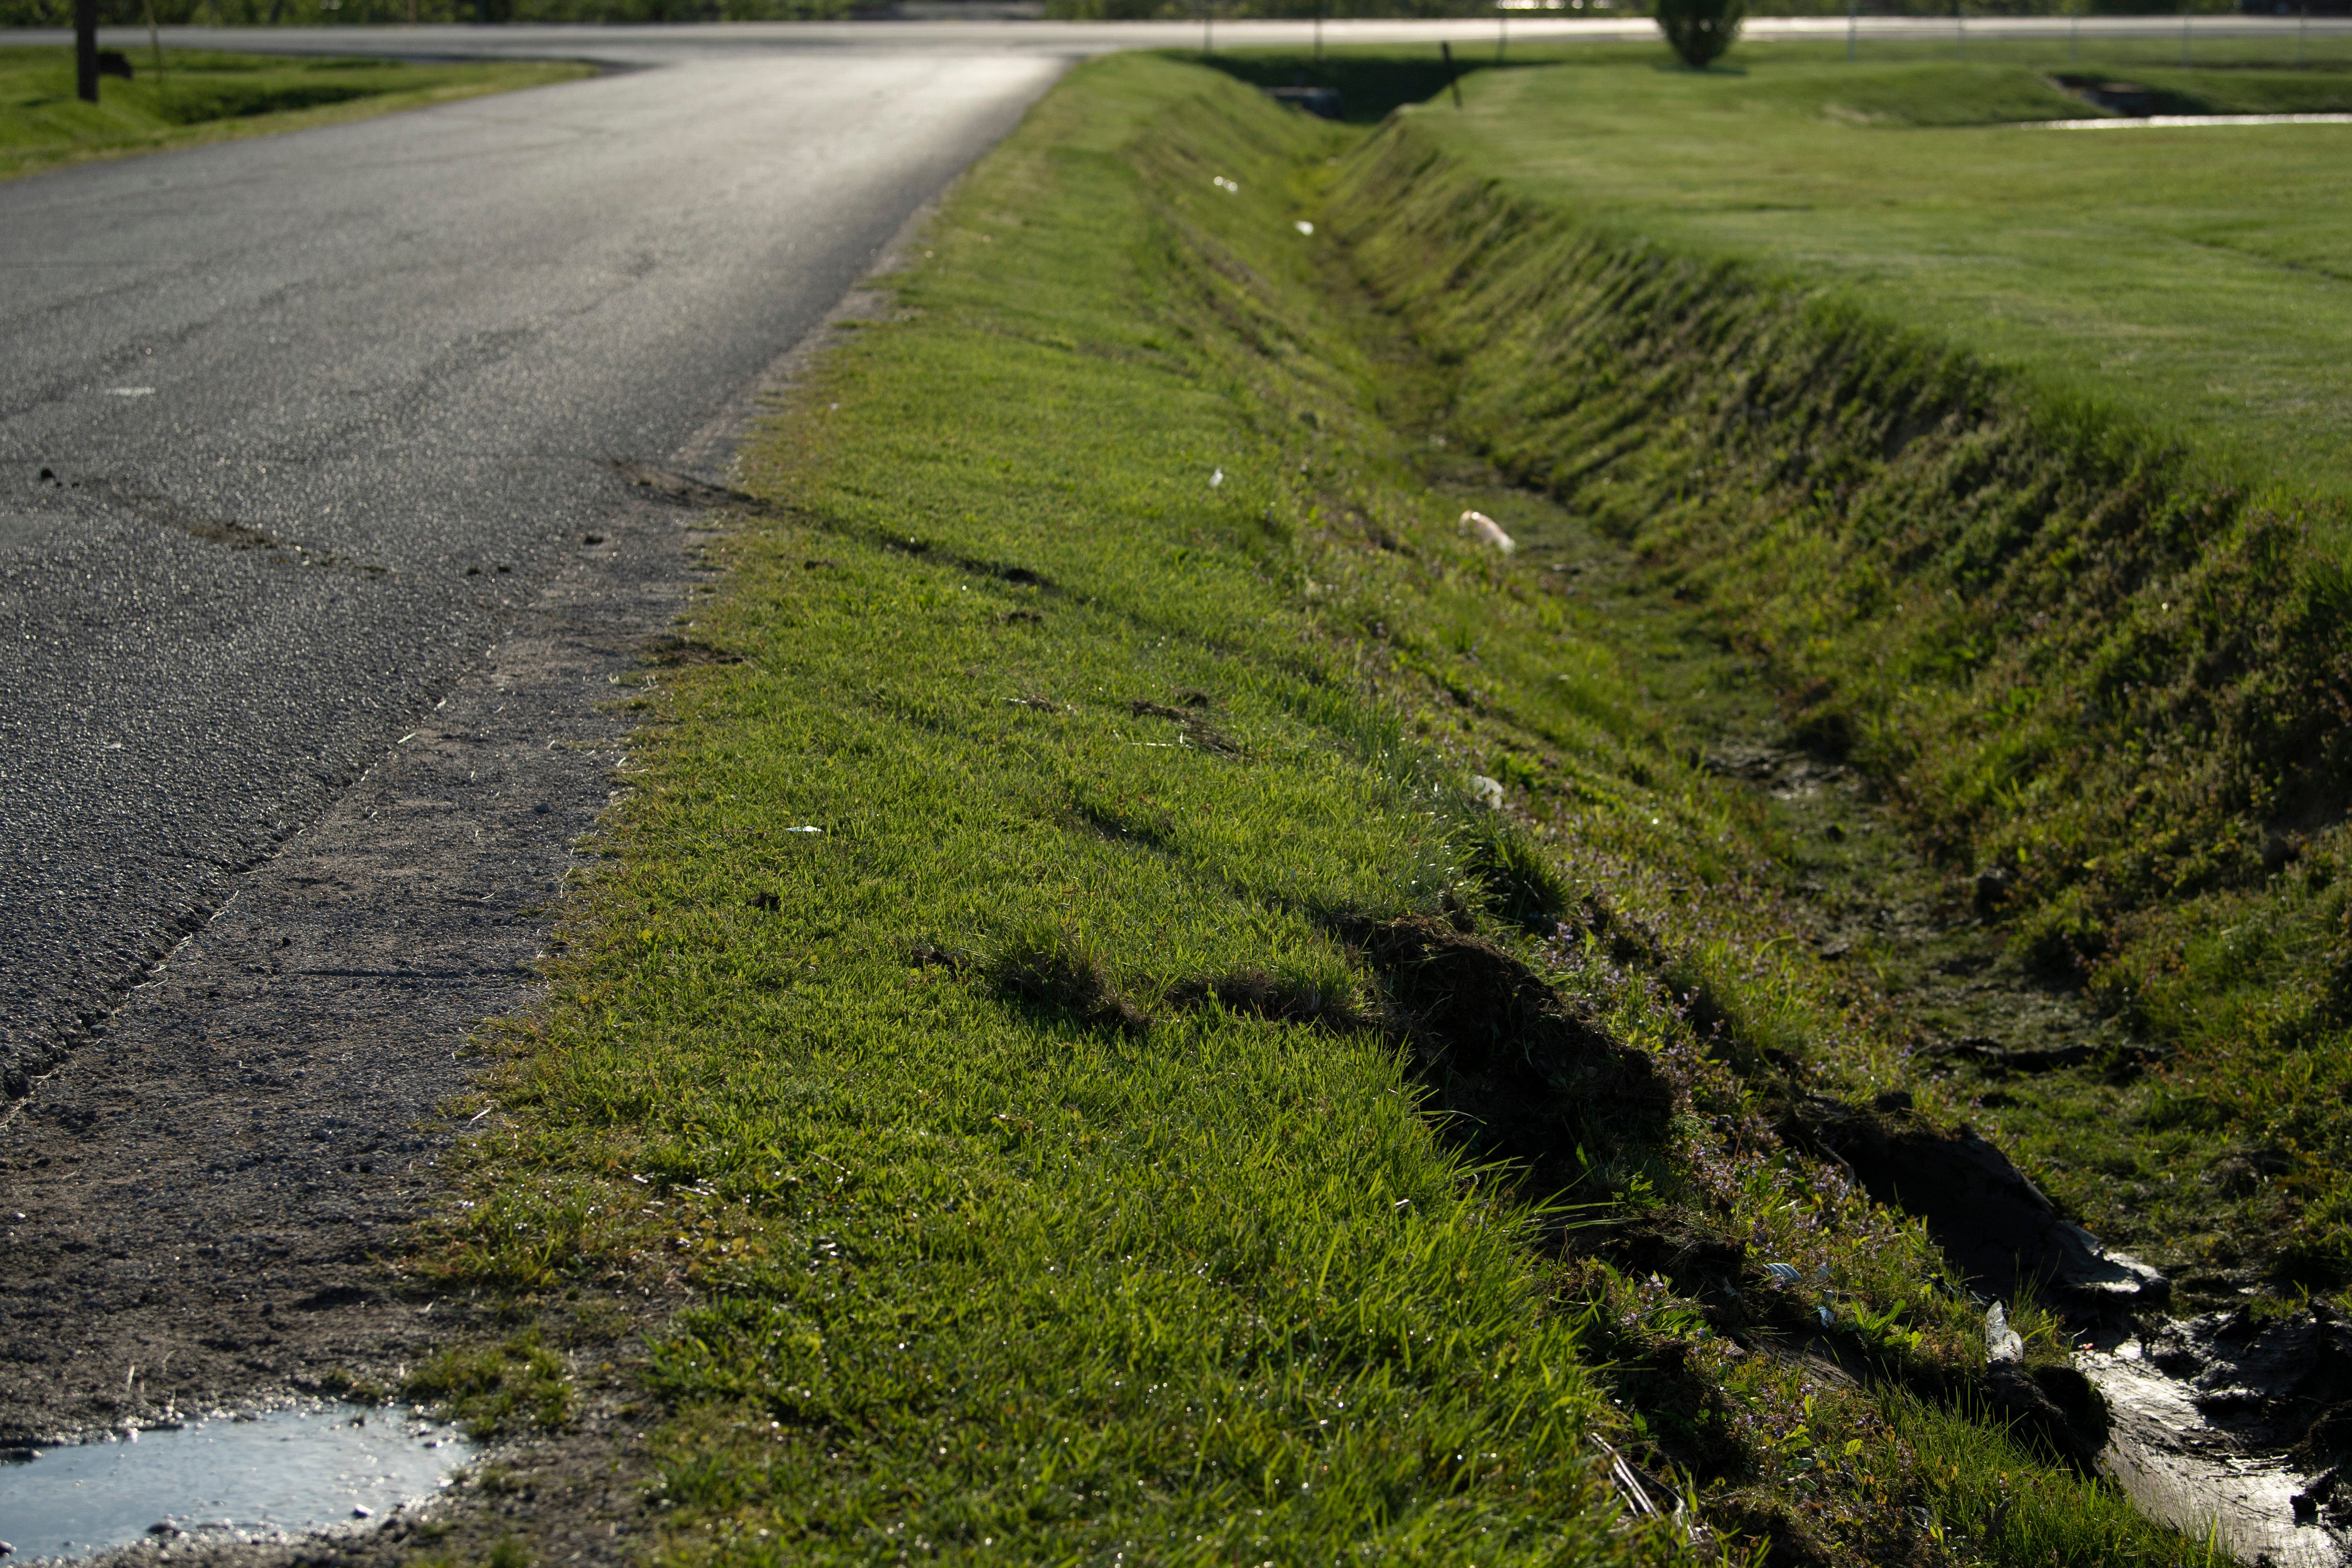 Skid marks on the grassy area from the car crash resulting in their capture